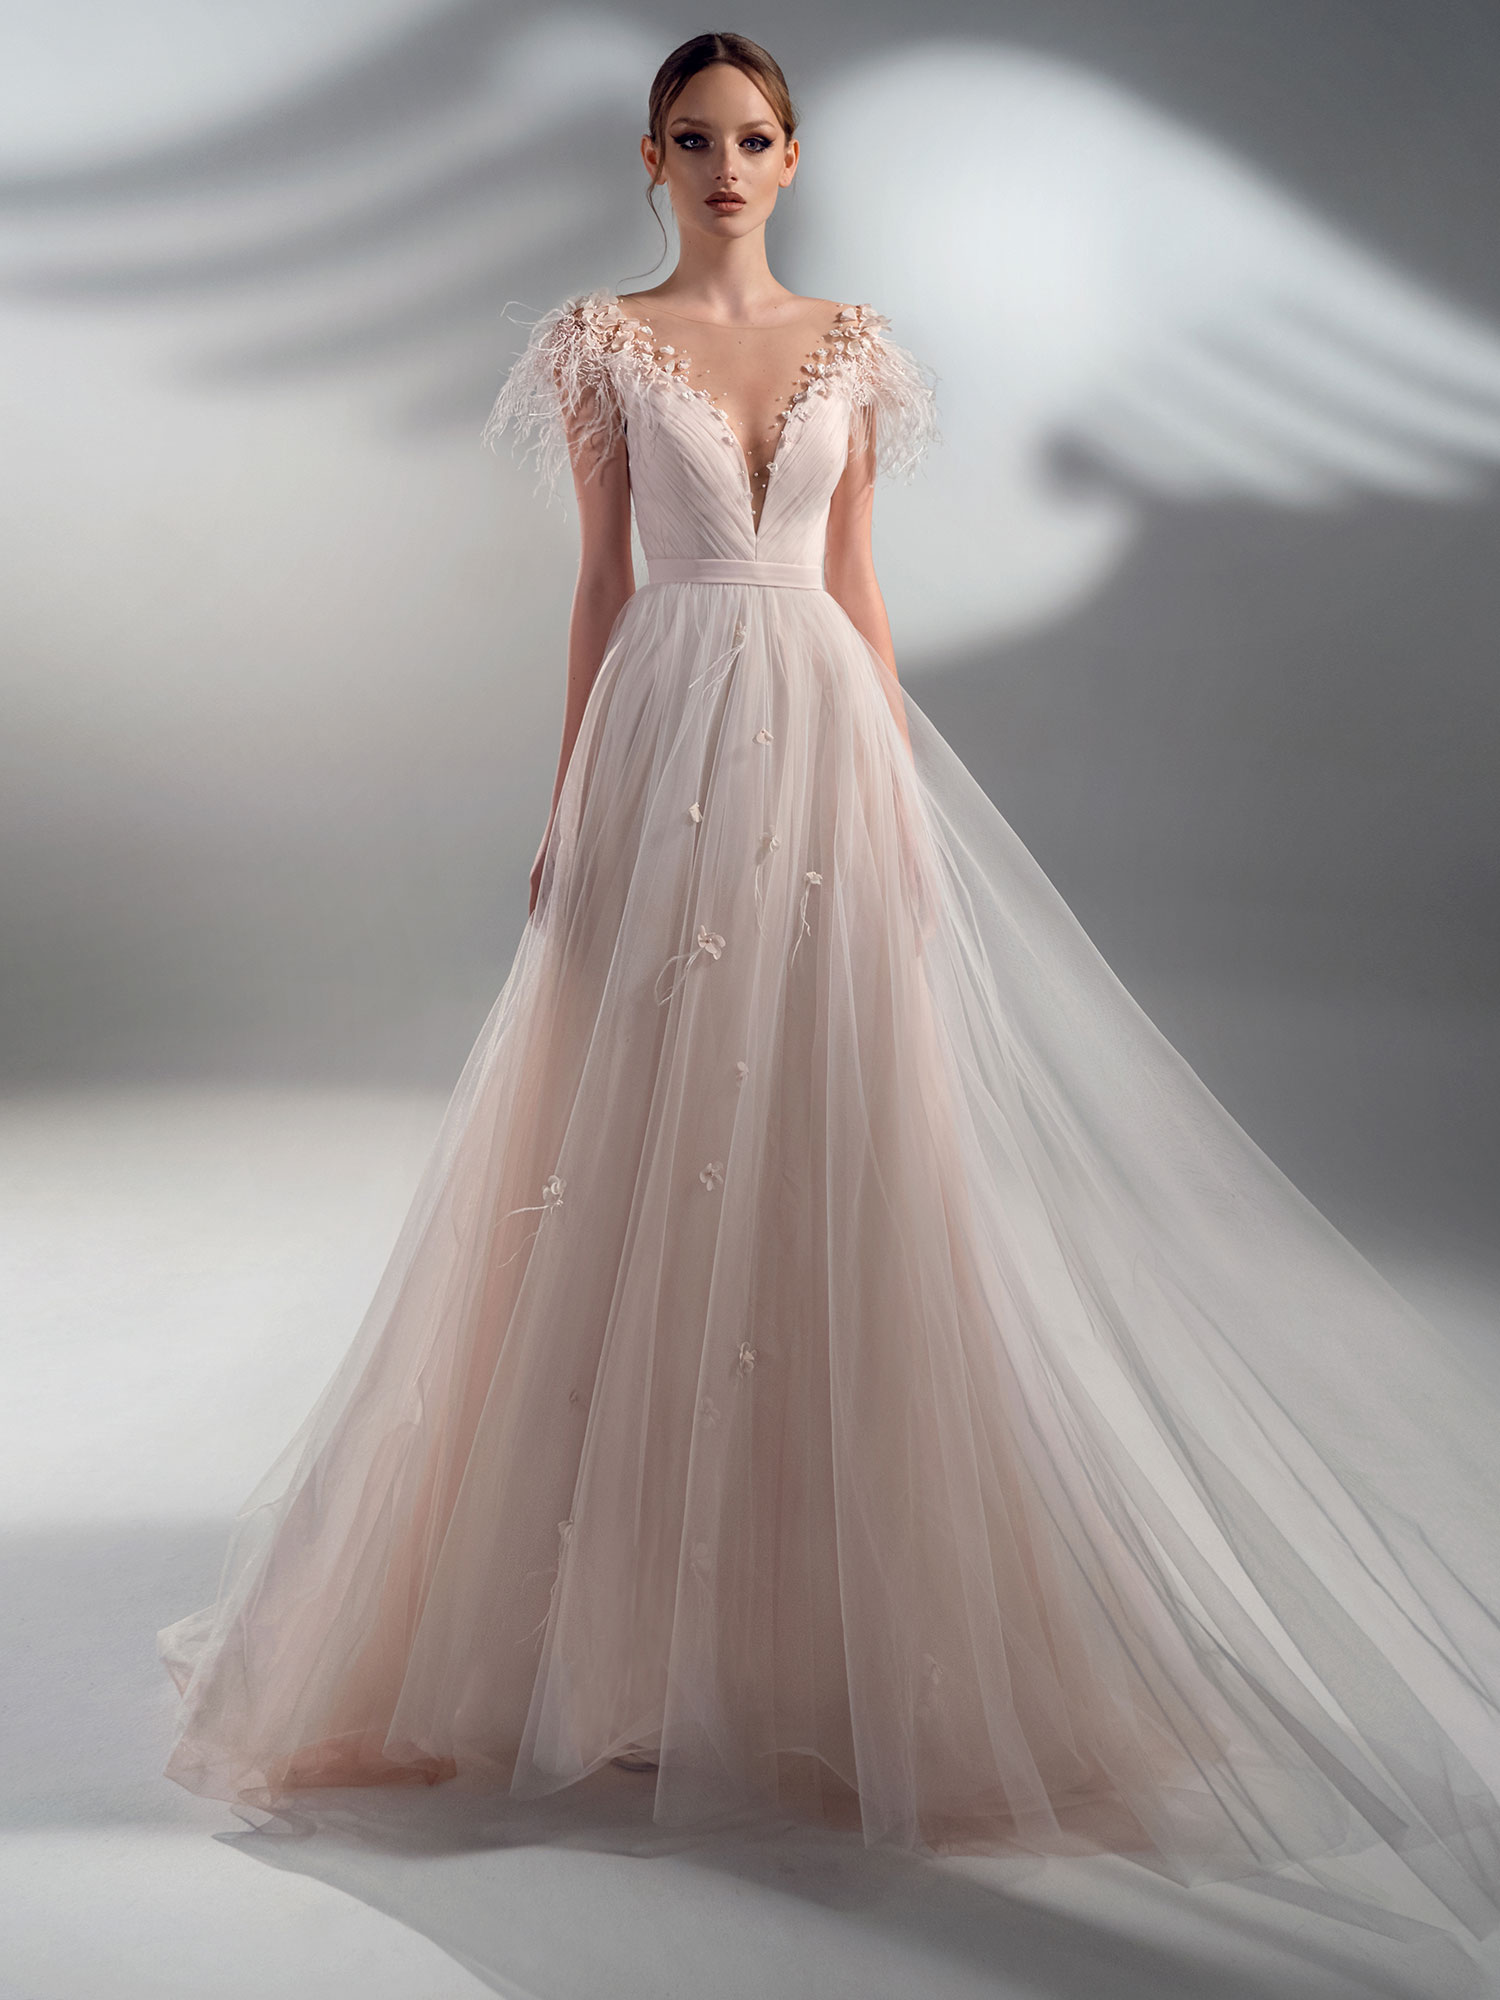 A-line Wedding Dresses With Sleeves Top 10 - Find the Perfect Venue for ...